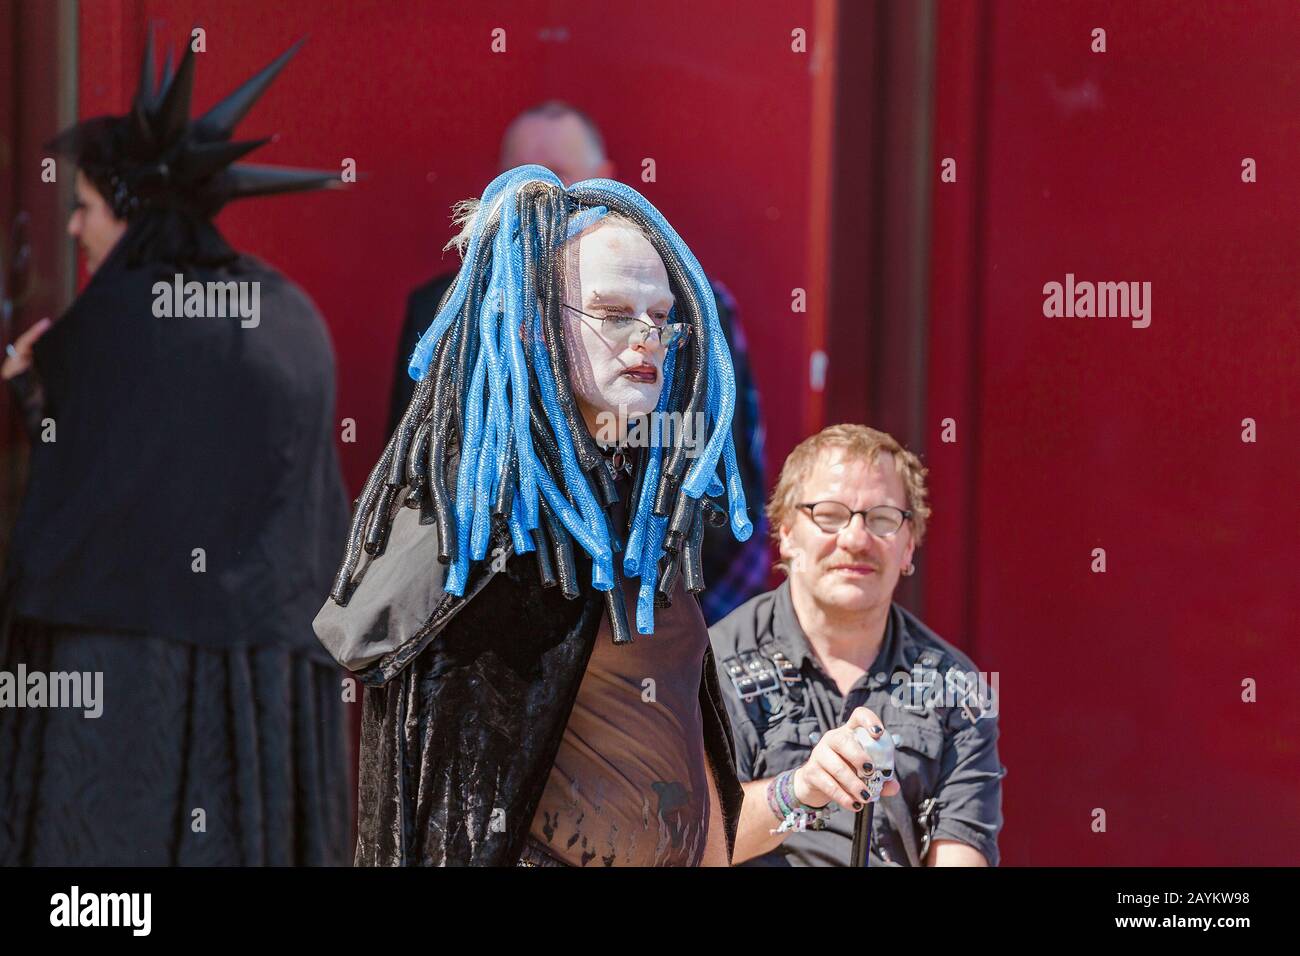 LEIPZIG, GERMANY - MAY 21, 2018: Dressed up people take part in the annual Gothic and Steampunk Festival in Leipzig Stock Photo